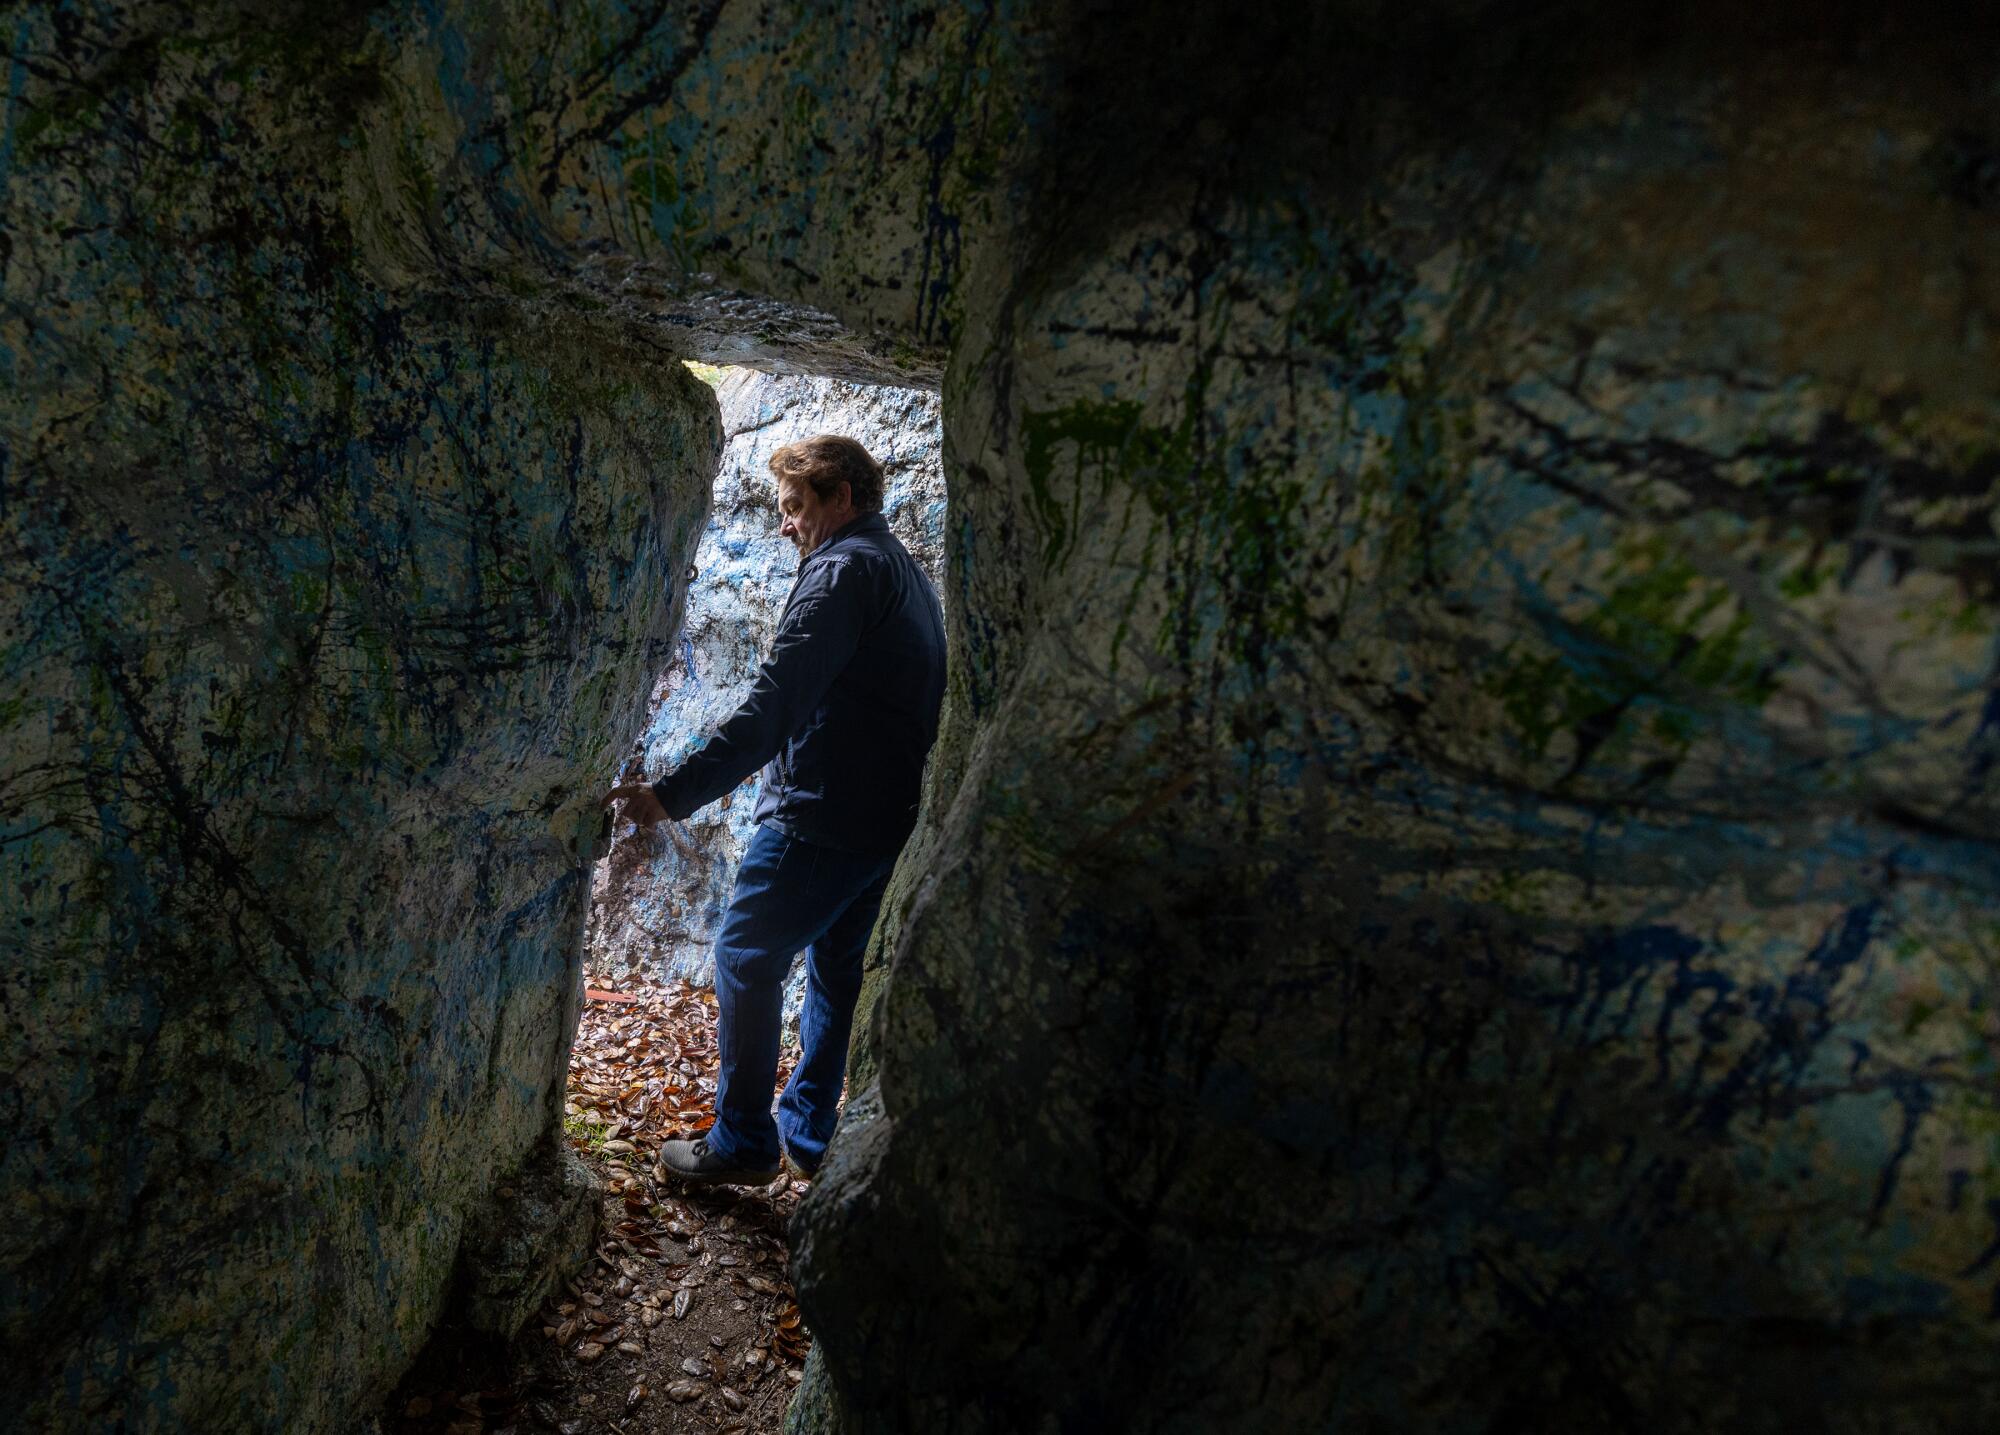 Tony Tucci stands at the entrance of a cave